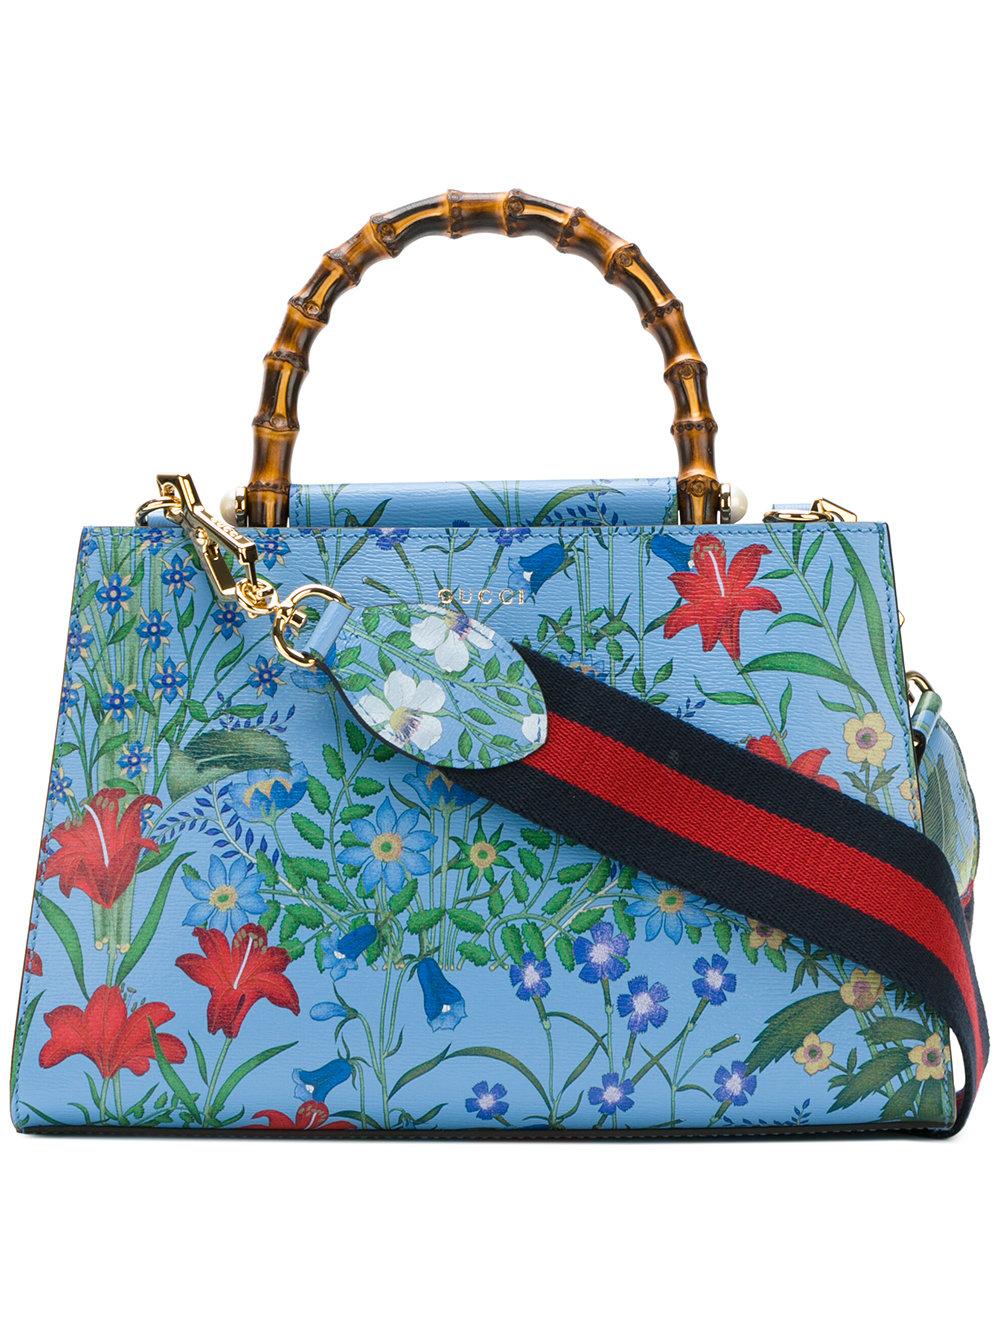 Gucci Leather Nymphaea Flora Mini Bag in Blue - Lyst